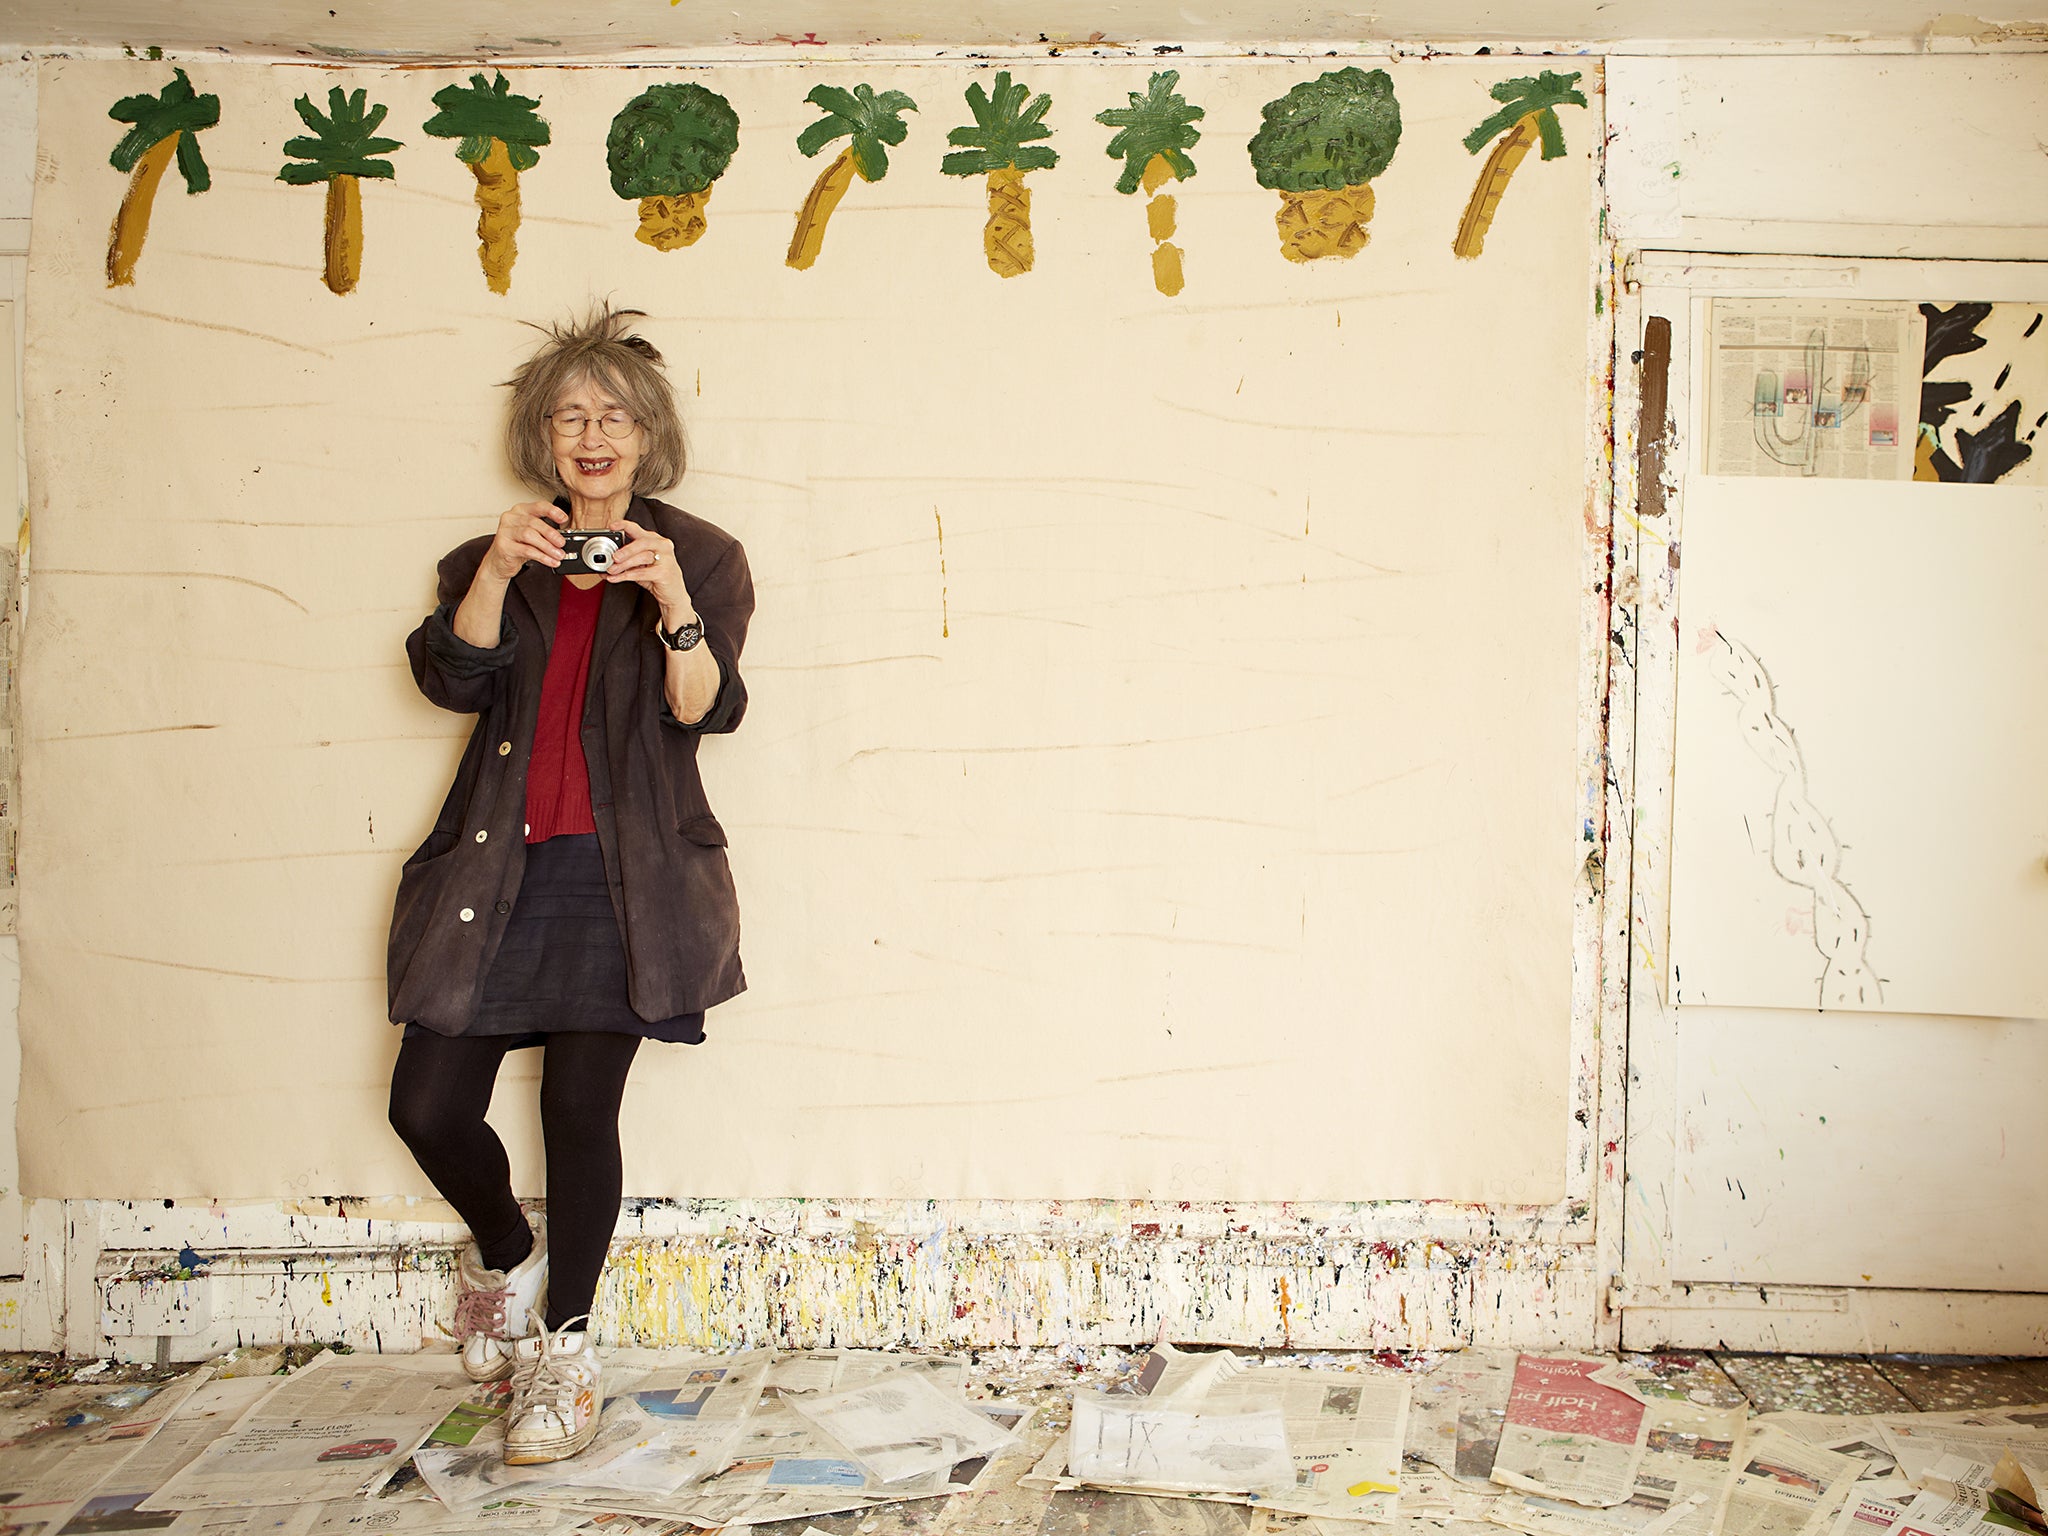 Rose Wylie is now heralded in America and by the likes of Germaine Greer